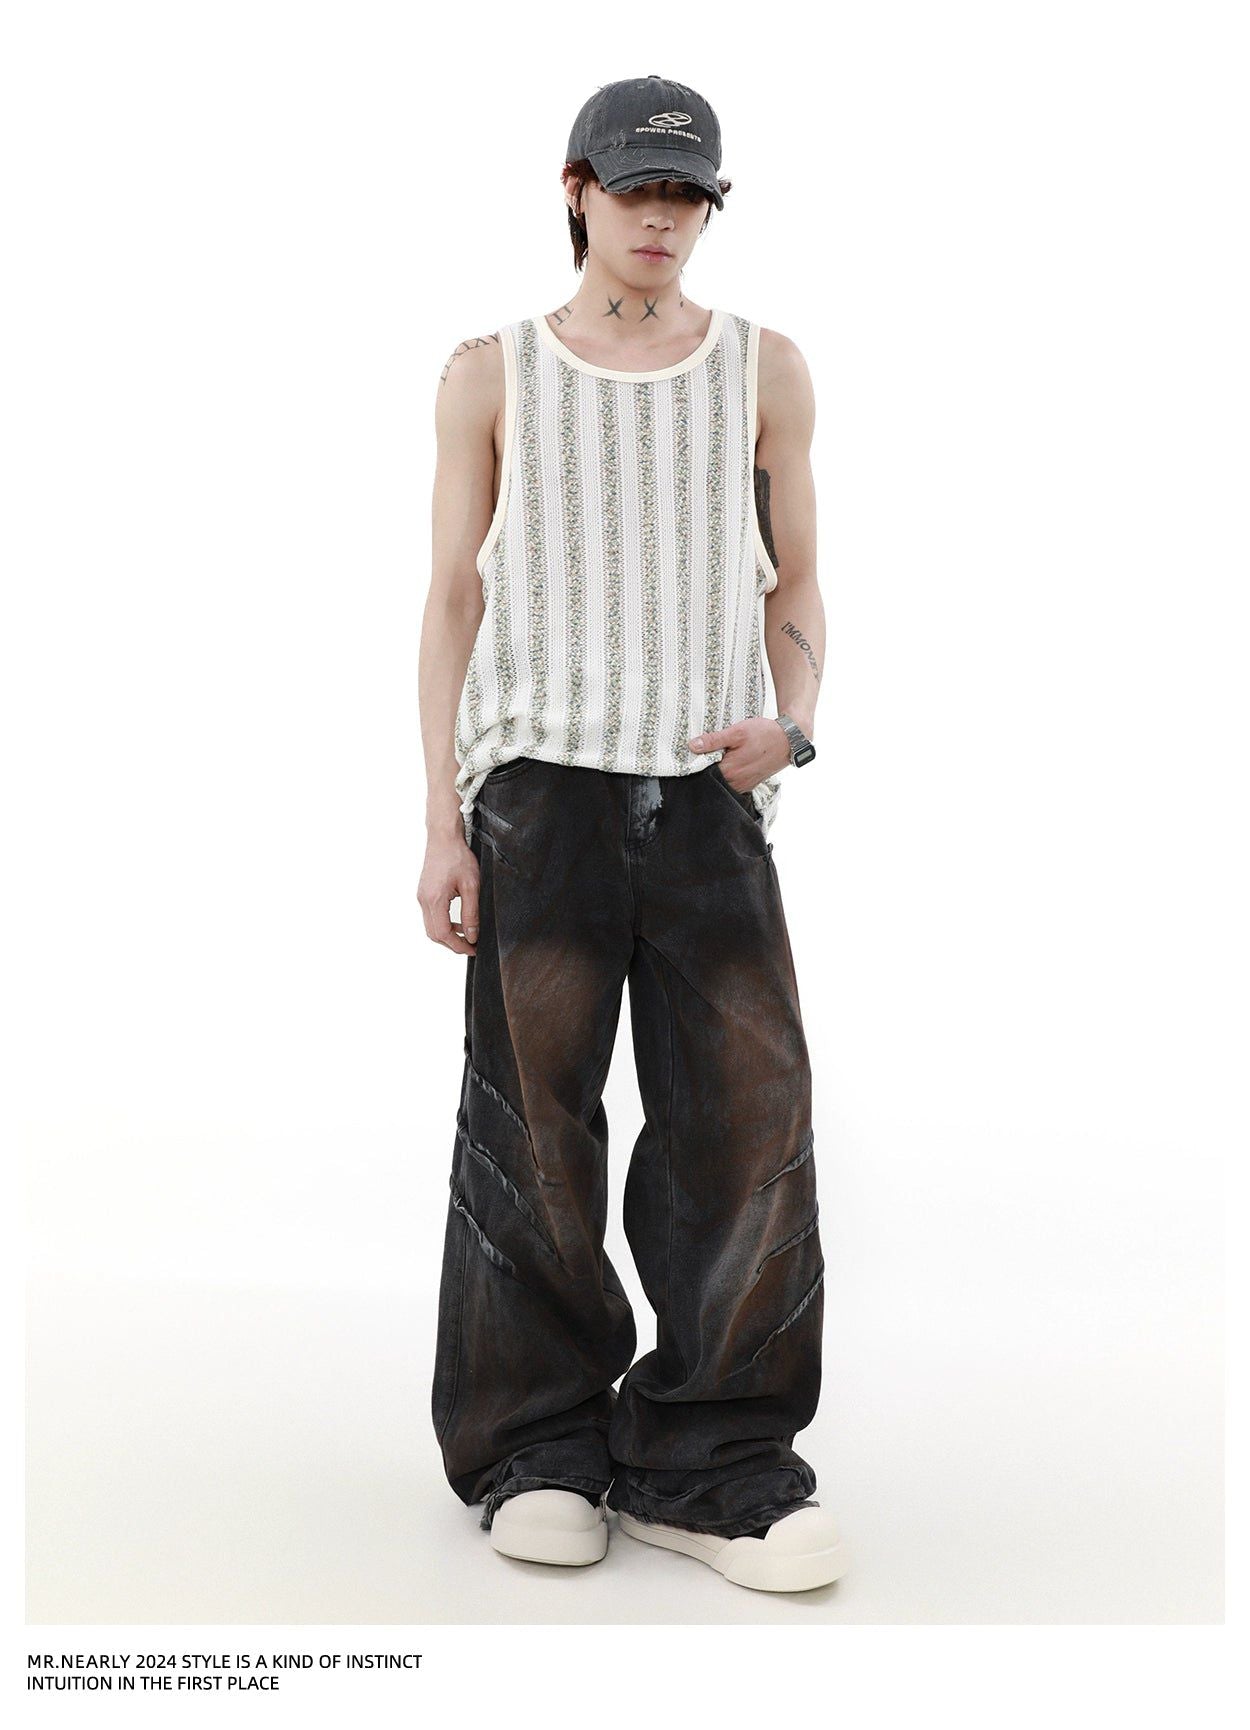 Vertical Stripes Knitted Tank Top Korean Street Fashion Tank Top By Mr Nearly Shop Online at OH Vault